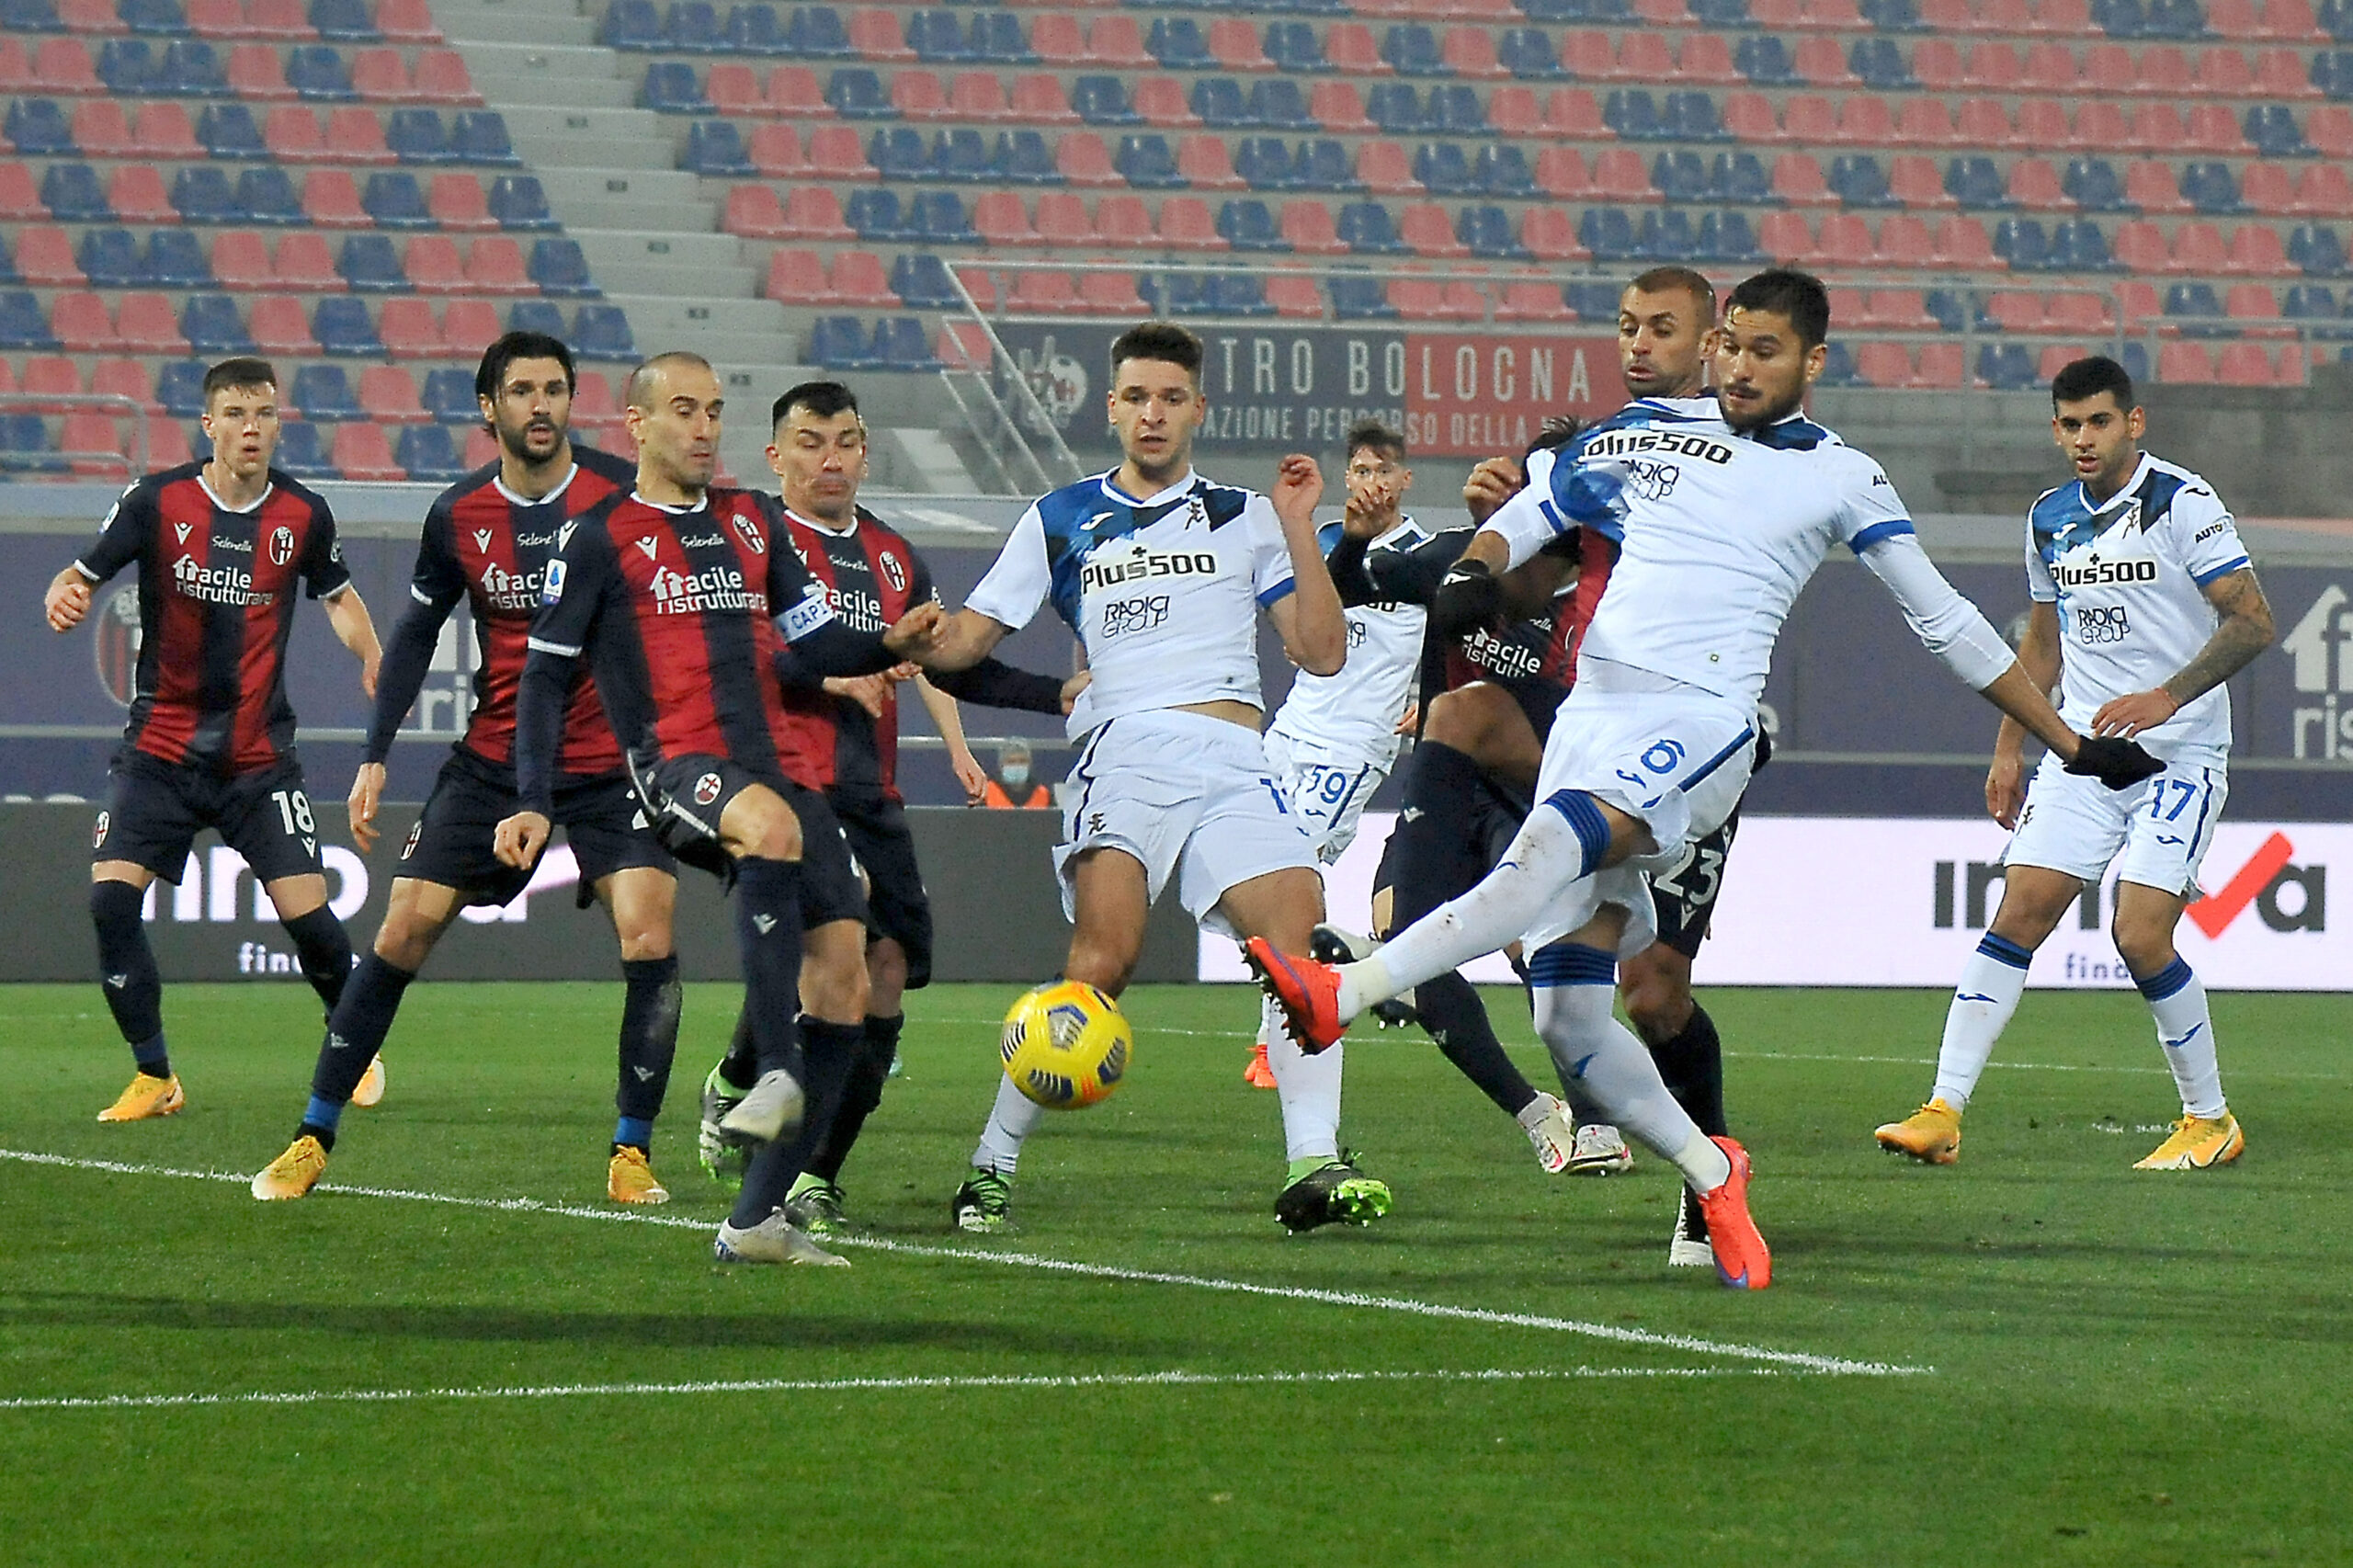 Atalanta-Bologna : Nfv1y61jqhmeqm - Do you want to watch the match?